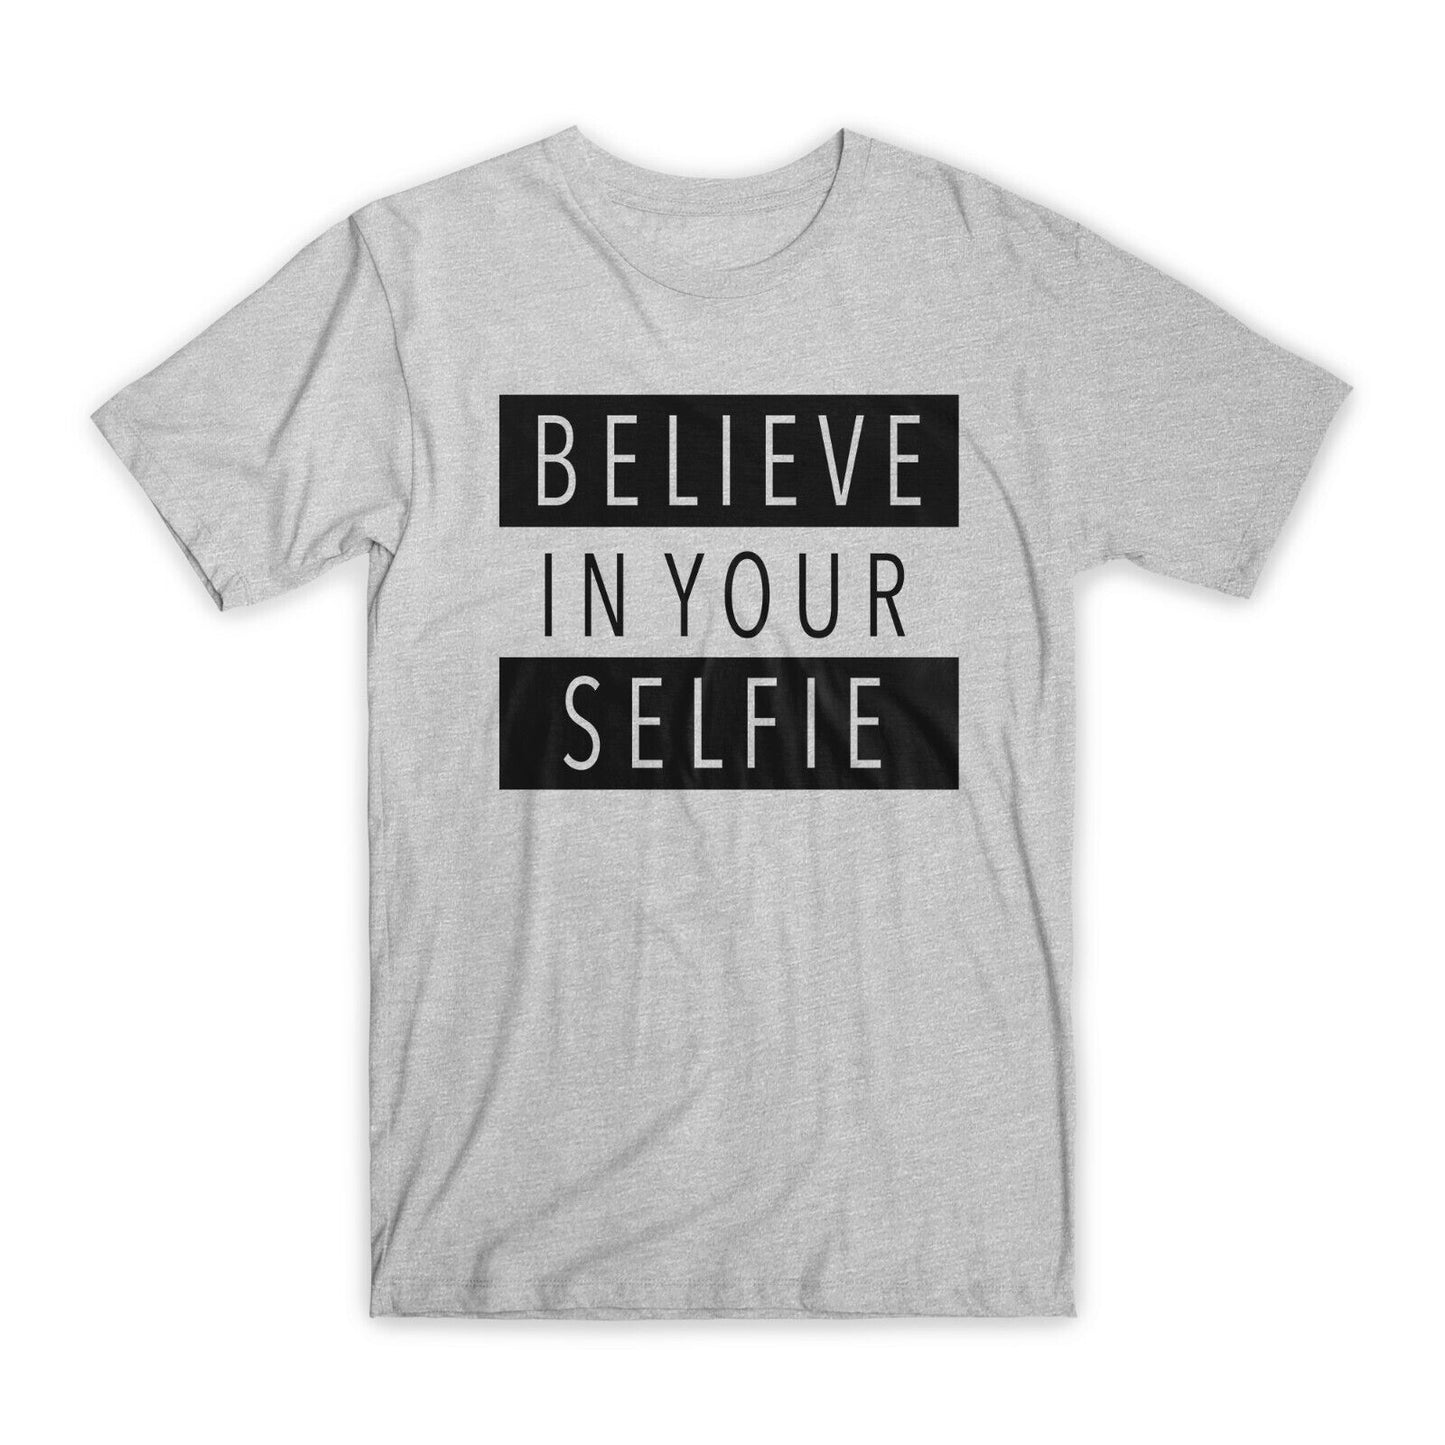 Believe in Your Selfie T-Shirt Premium Soft Cotton Crew Neck Funny Tees Gift NEW